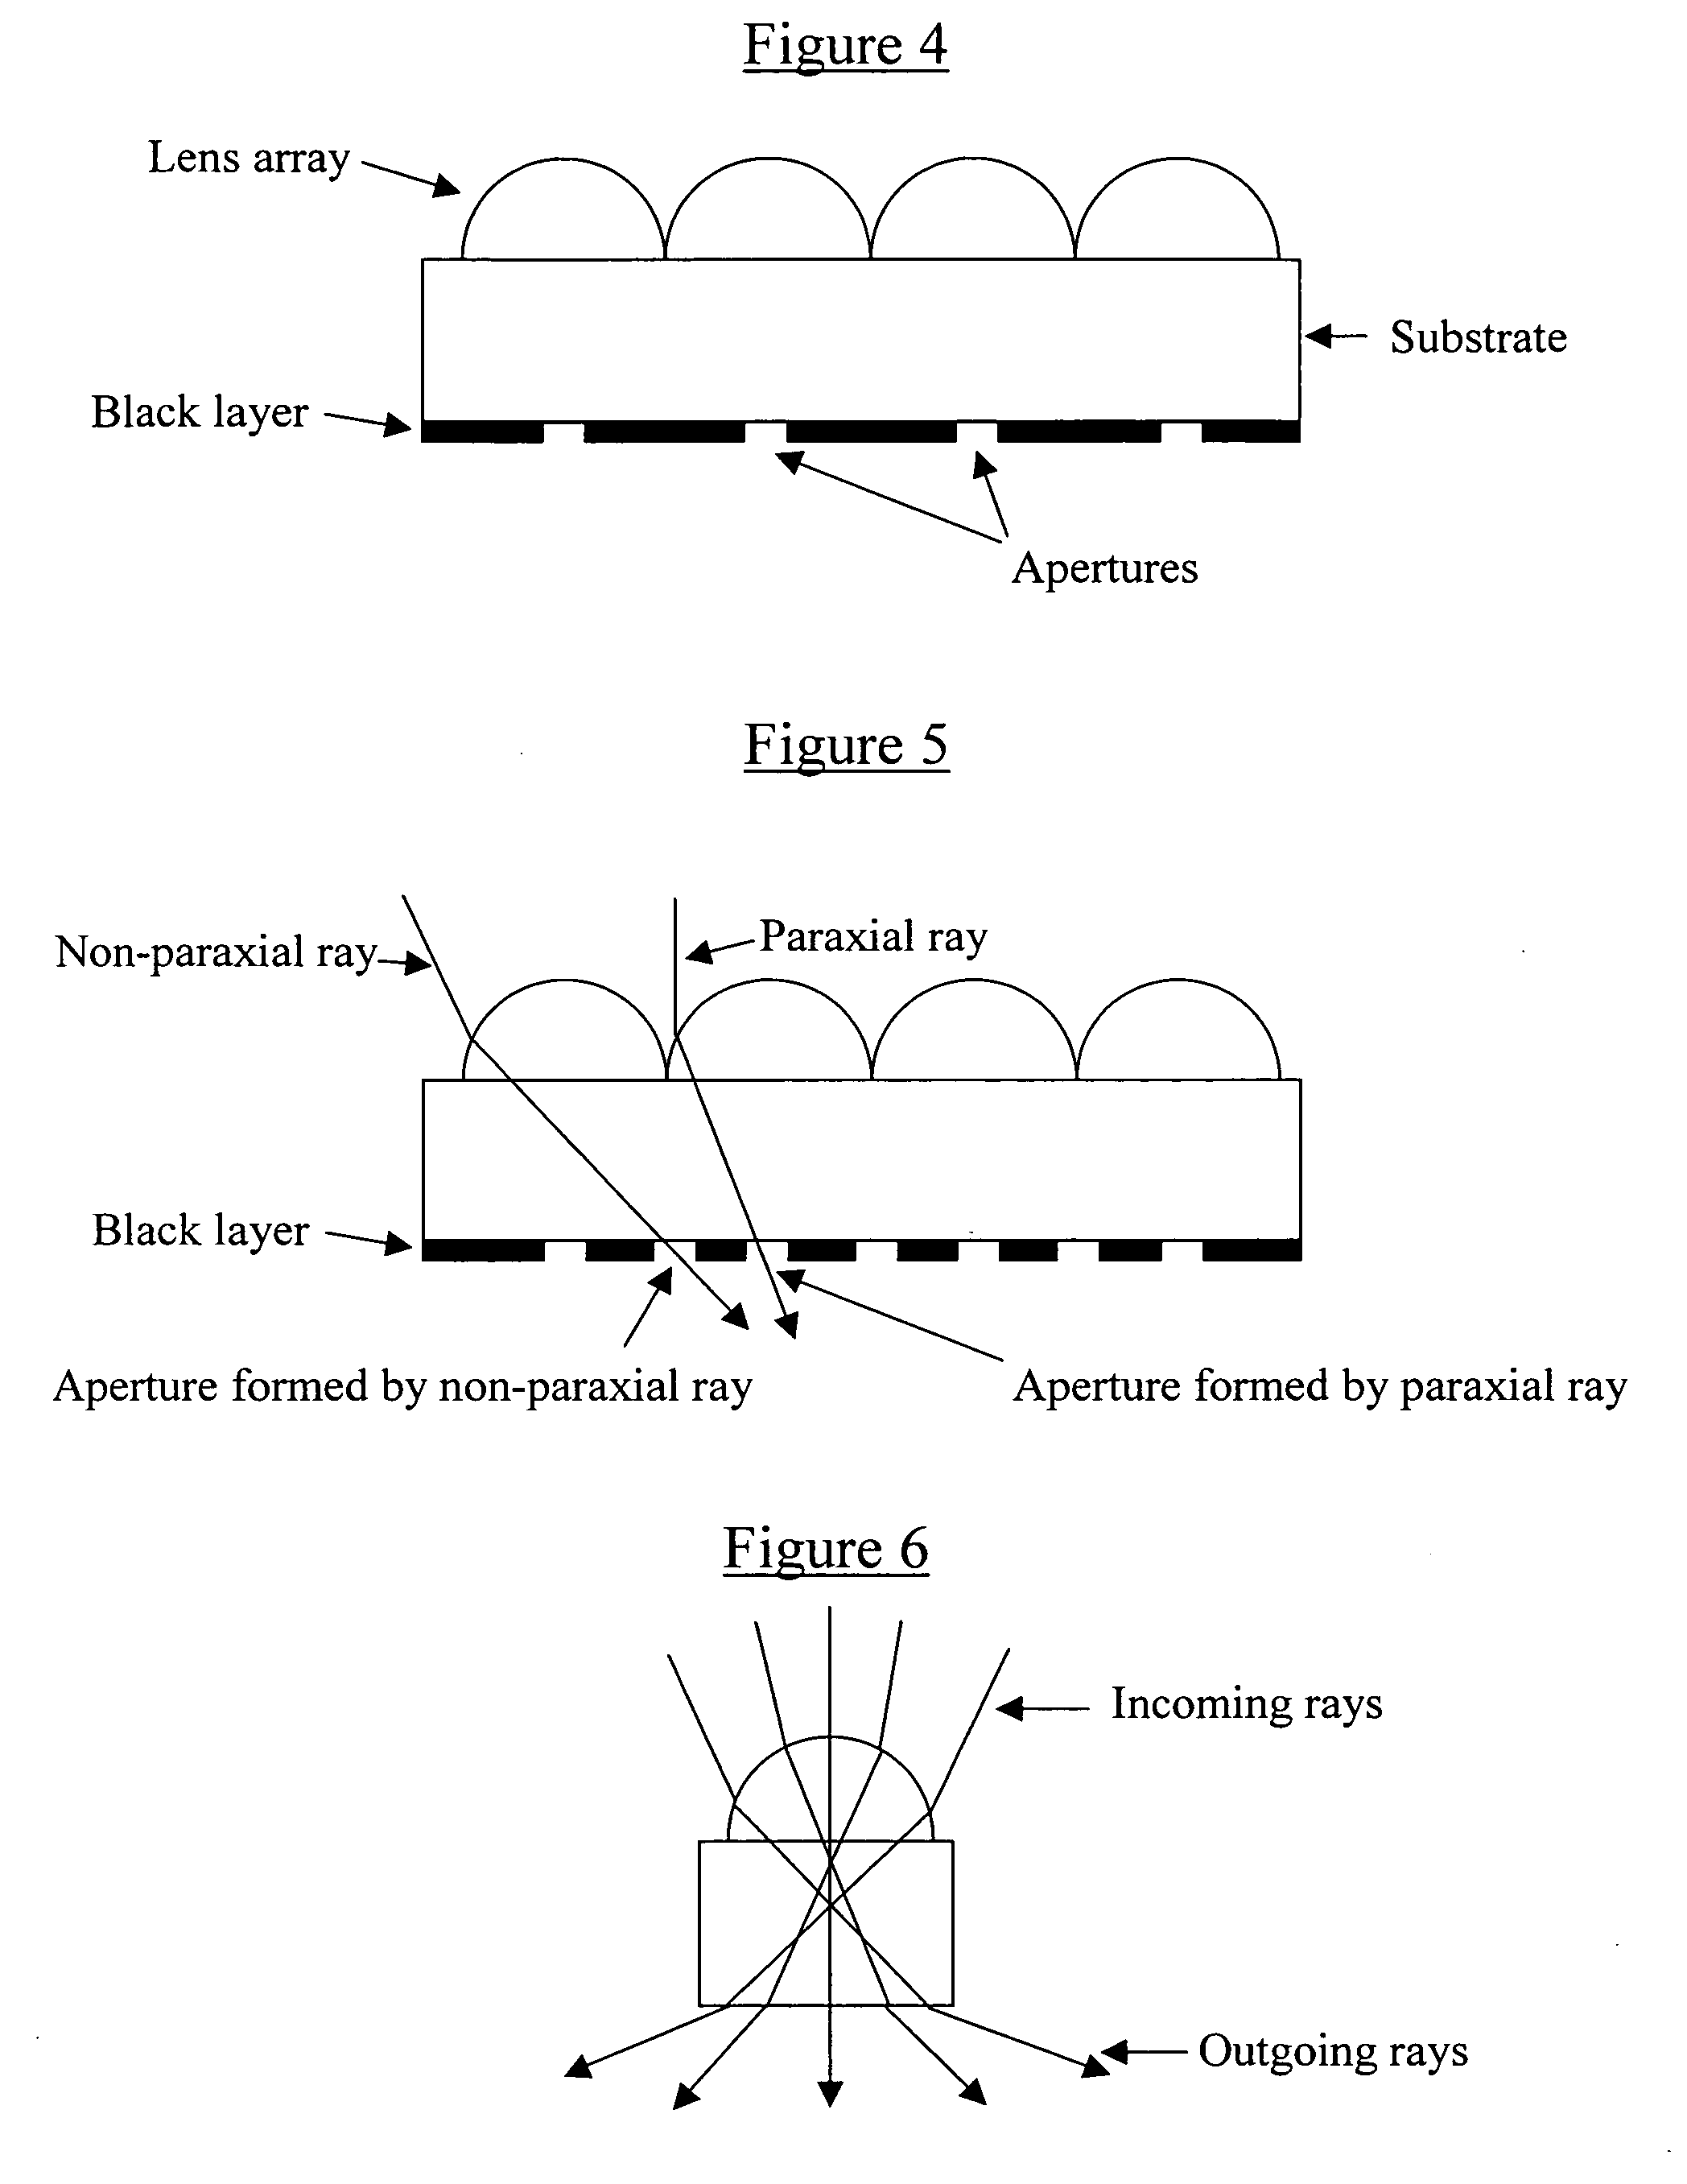 Microstructures for producing optical devices, sieves, molds and/or sensors, and methods for replicating and using same